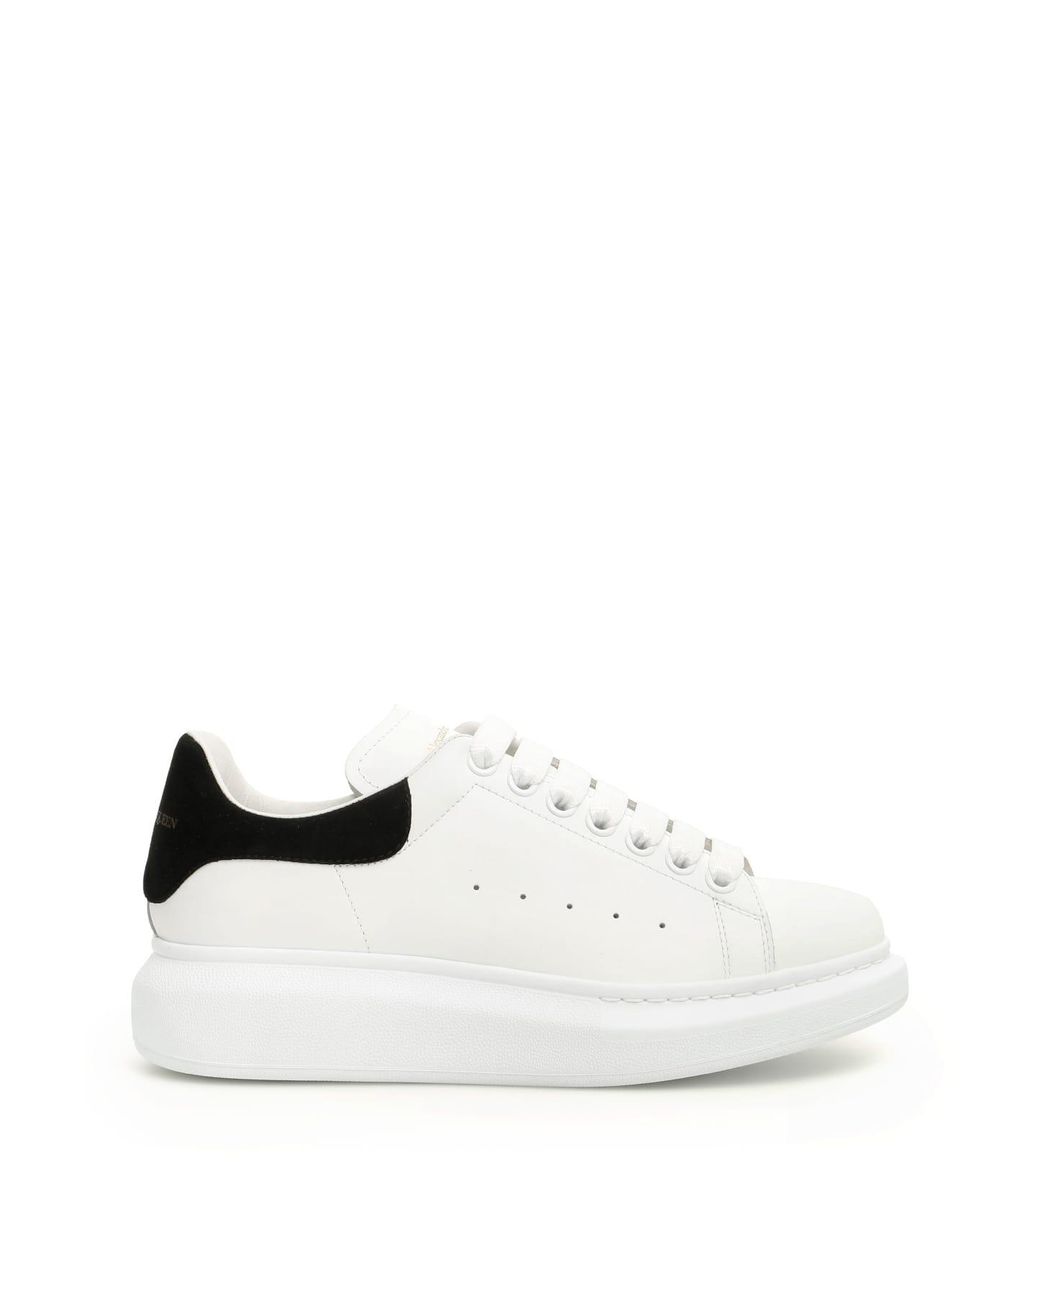 Alexander McQueen Leather Oversized Sneakers in White,Black (White) - Lyst